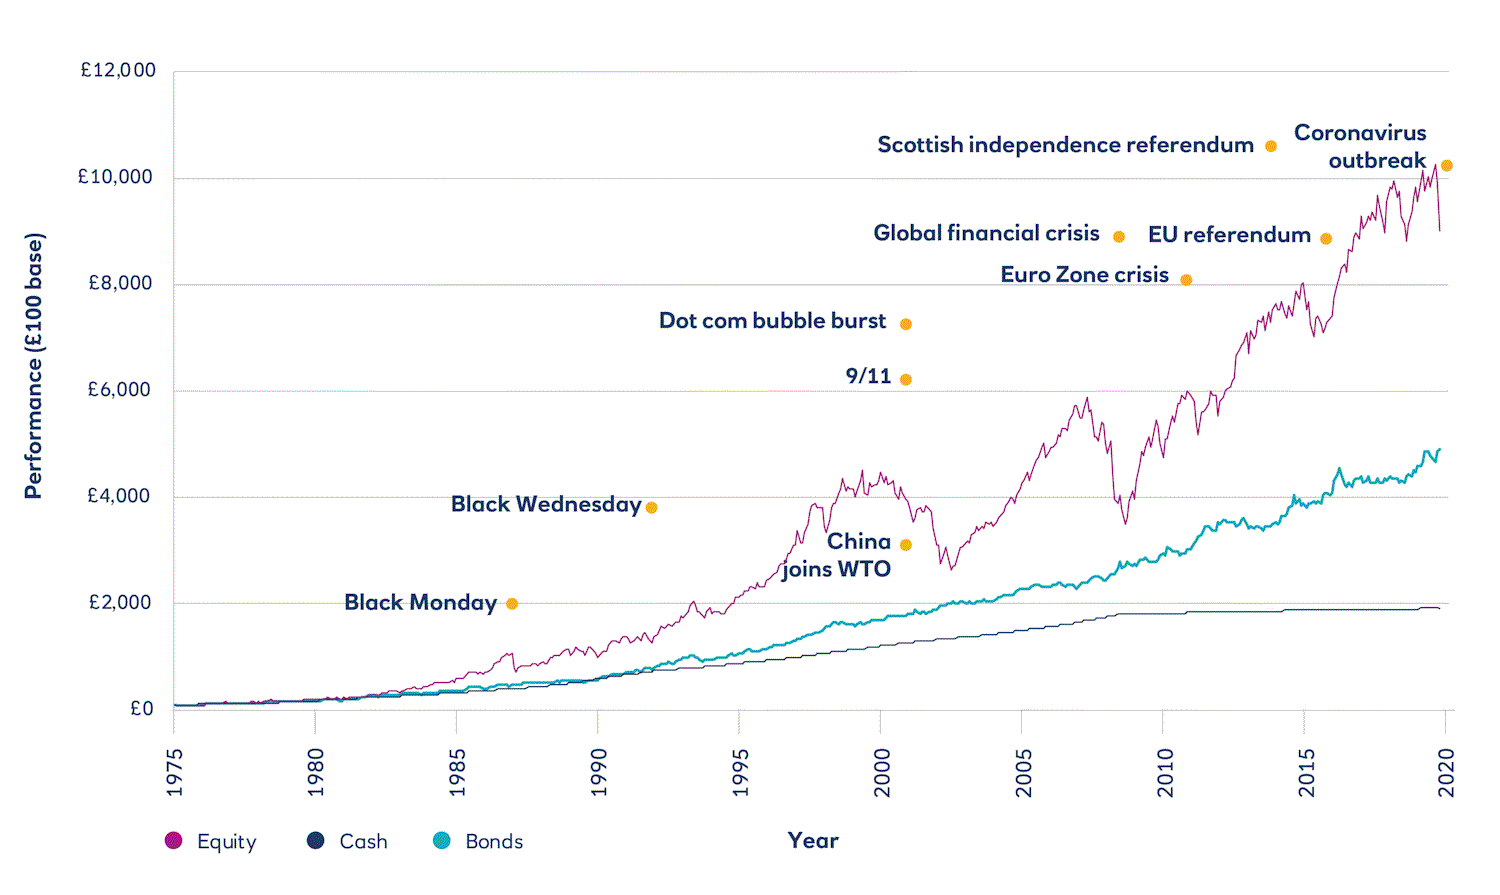 Chart showing the ups and downs of the UK share market over the long term between 1975 and 2020.